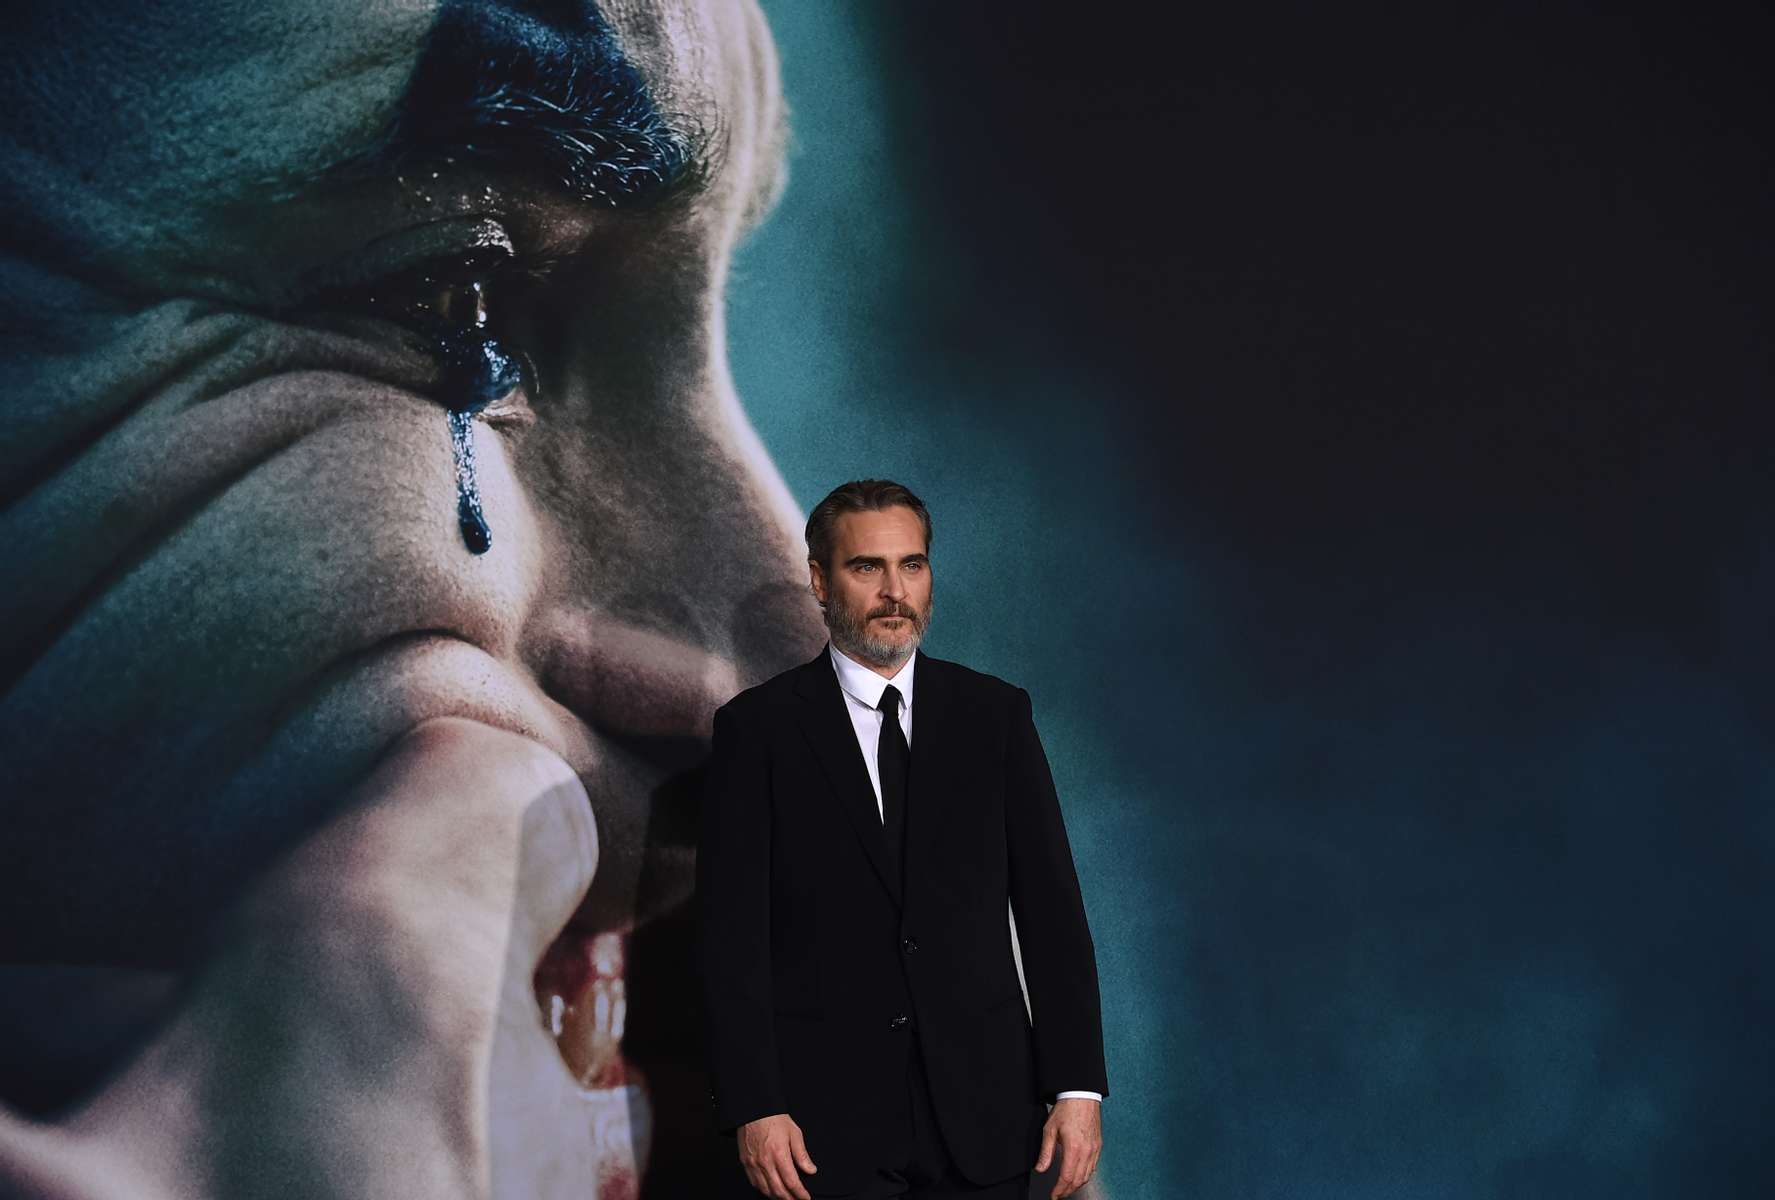 Cast member Joaquin Phoenix arrives at the Los Angeles premiere of “Joker” at TCL Chinese Theatre on September 8, 2019. (Photo by Jordan Strauss/Invision/AP)